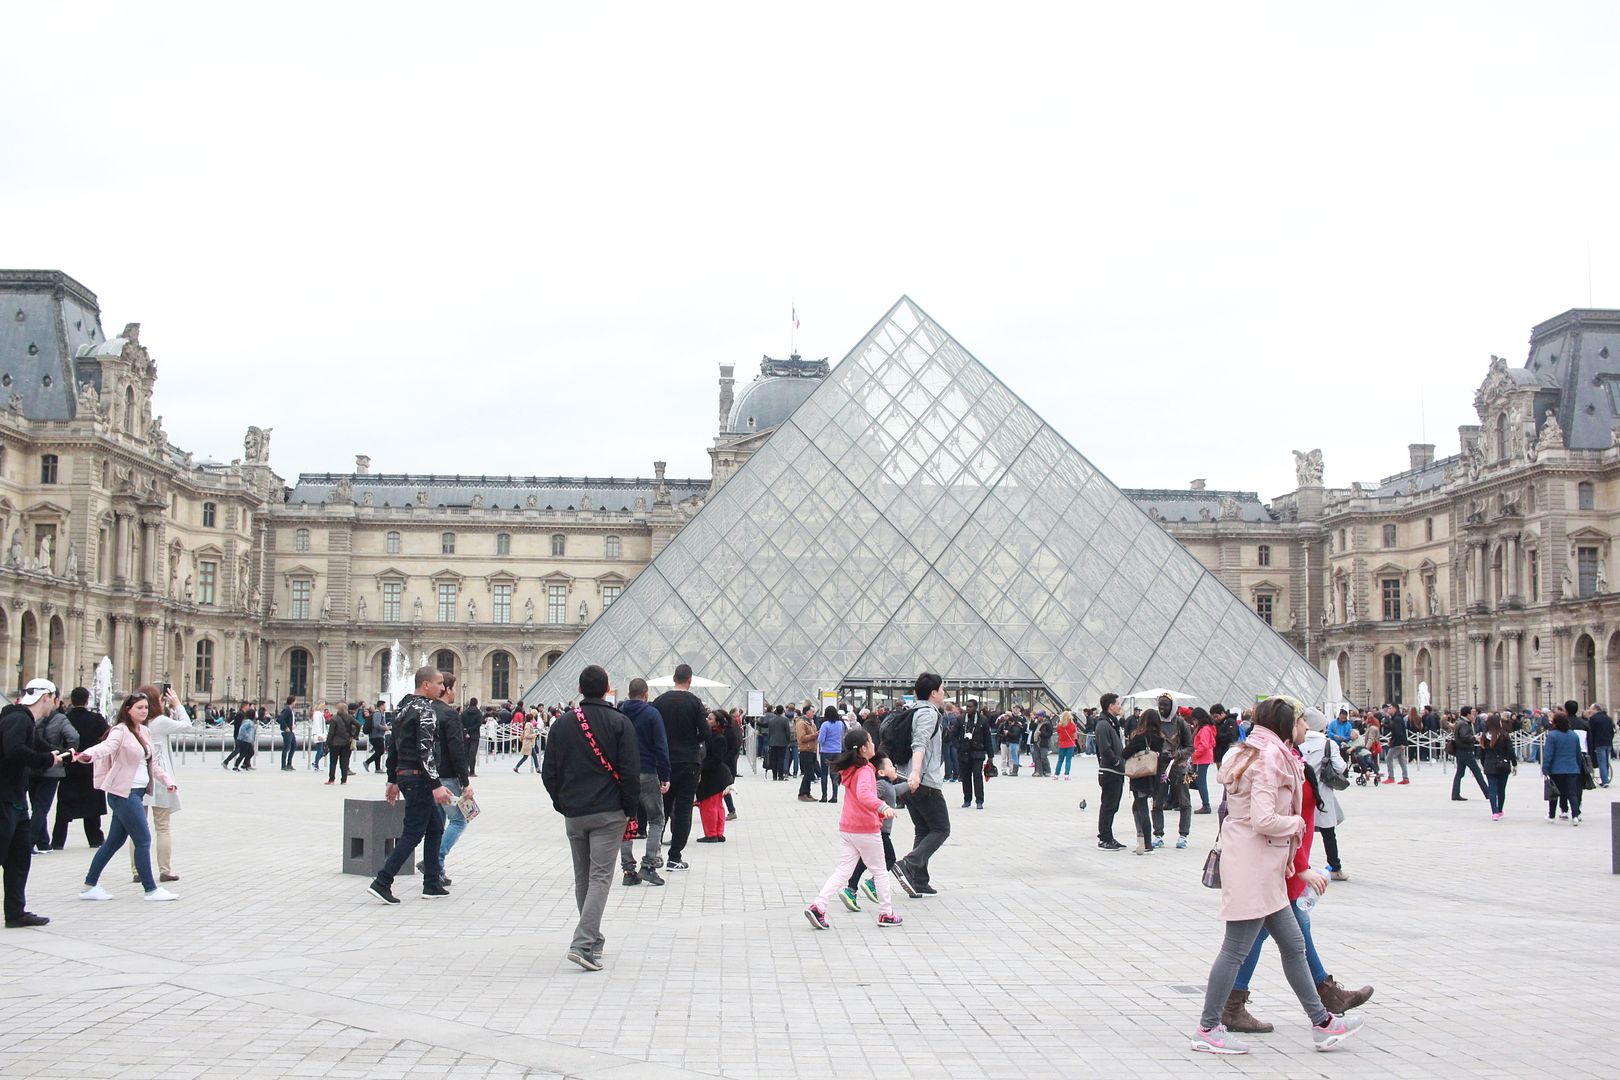 Musee du Louvre,Travel Guide, 48 hours in Paris, France, Europe Tour, Toronto blogger 